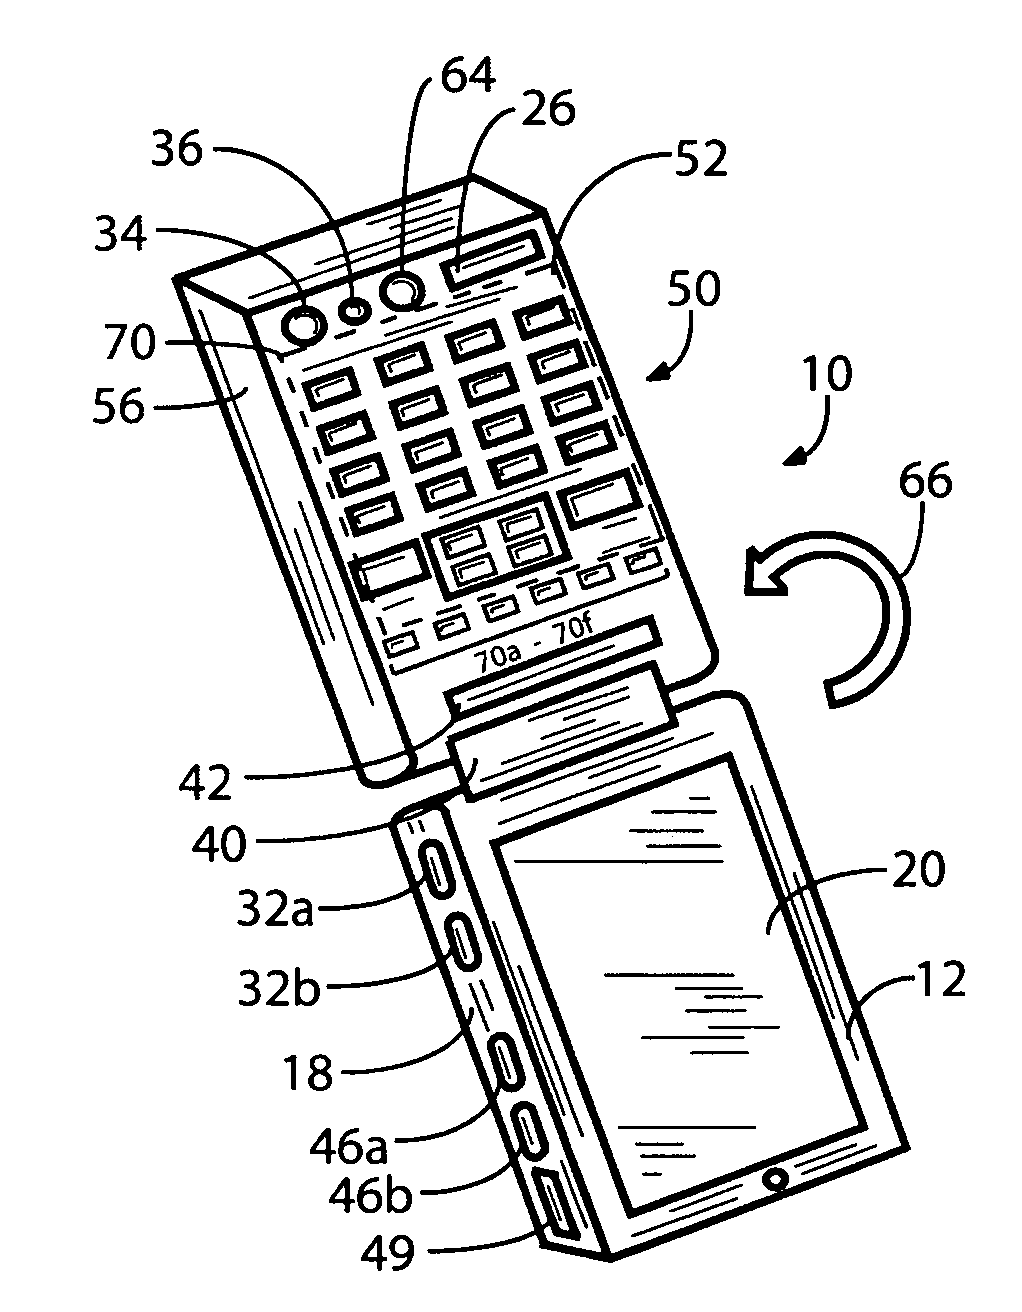 Hand held mobile communication device and method for managing printed documents